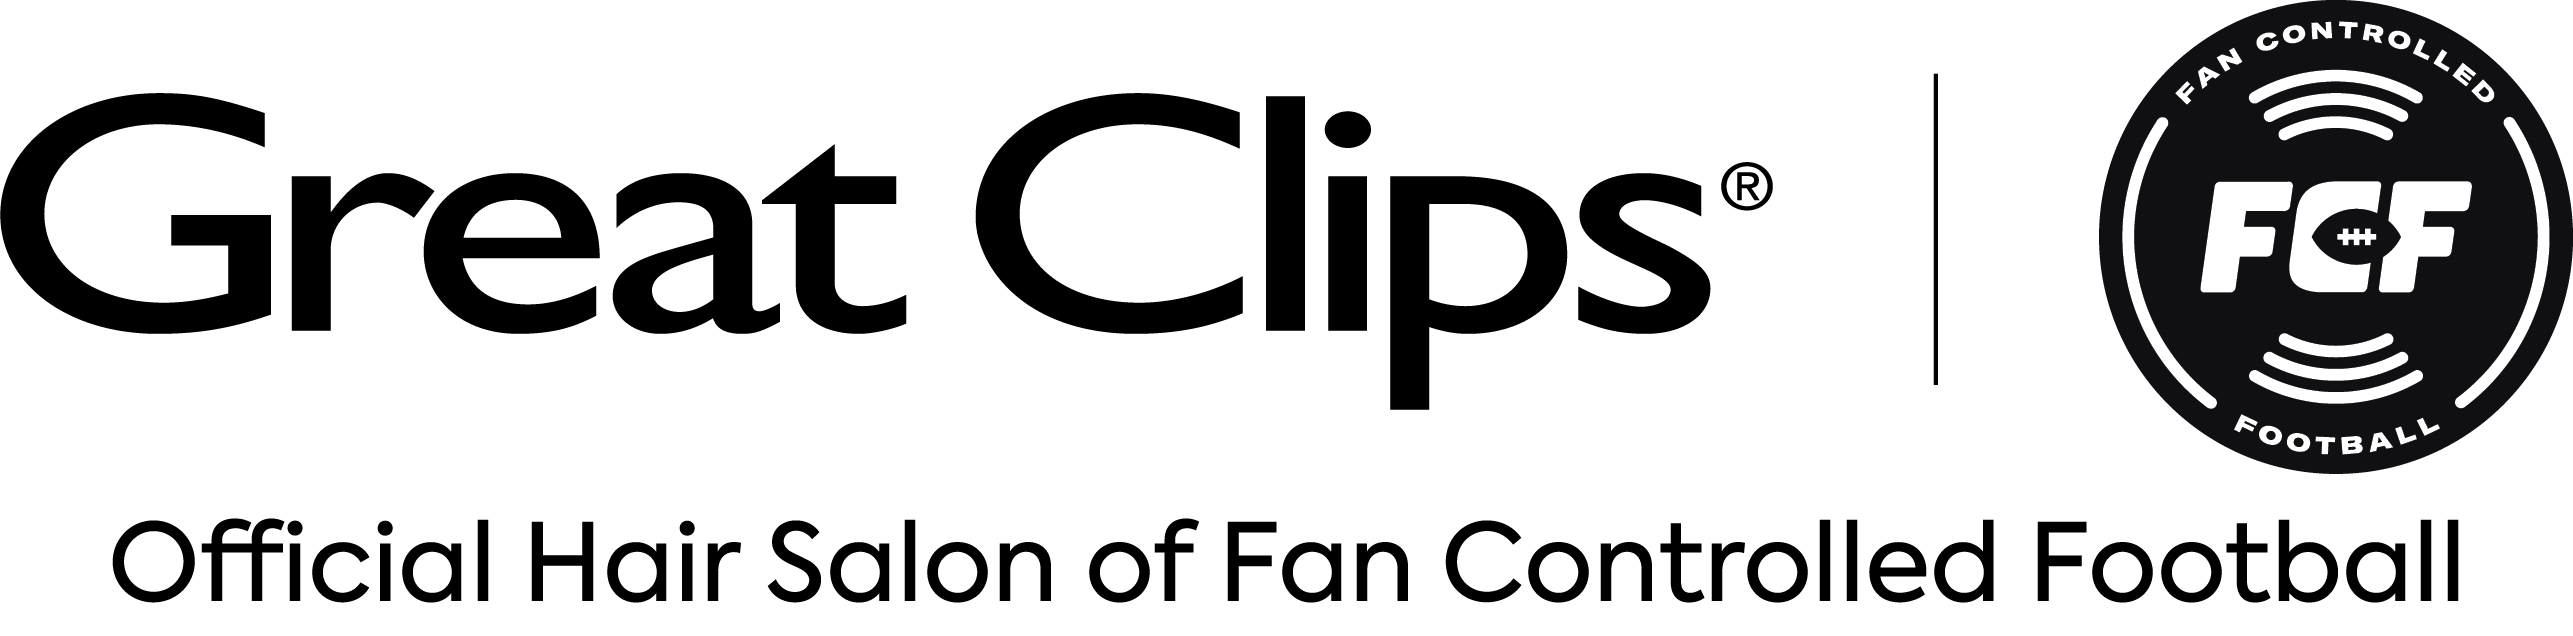 Logos of Great Clips and Fan Controlled Football next to each other, with text underneath reading Official Hair Salon of Fan Controlled Football